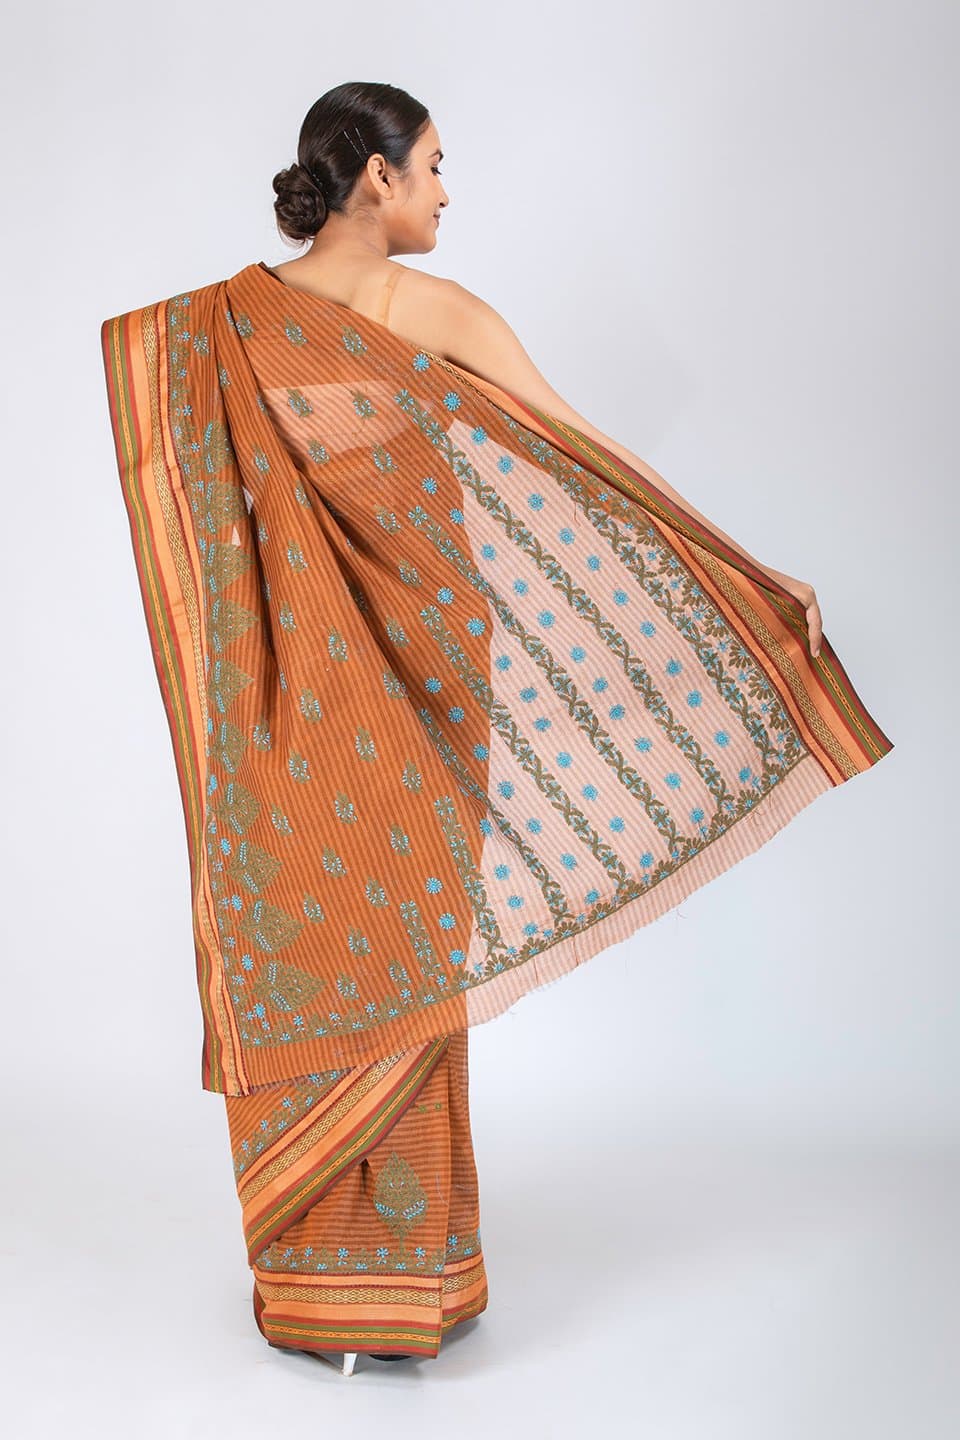 Lucknow Chikan Emporium Cotton Chanderi  Brown Color Saree With Blouse 